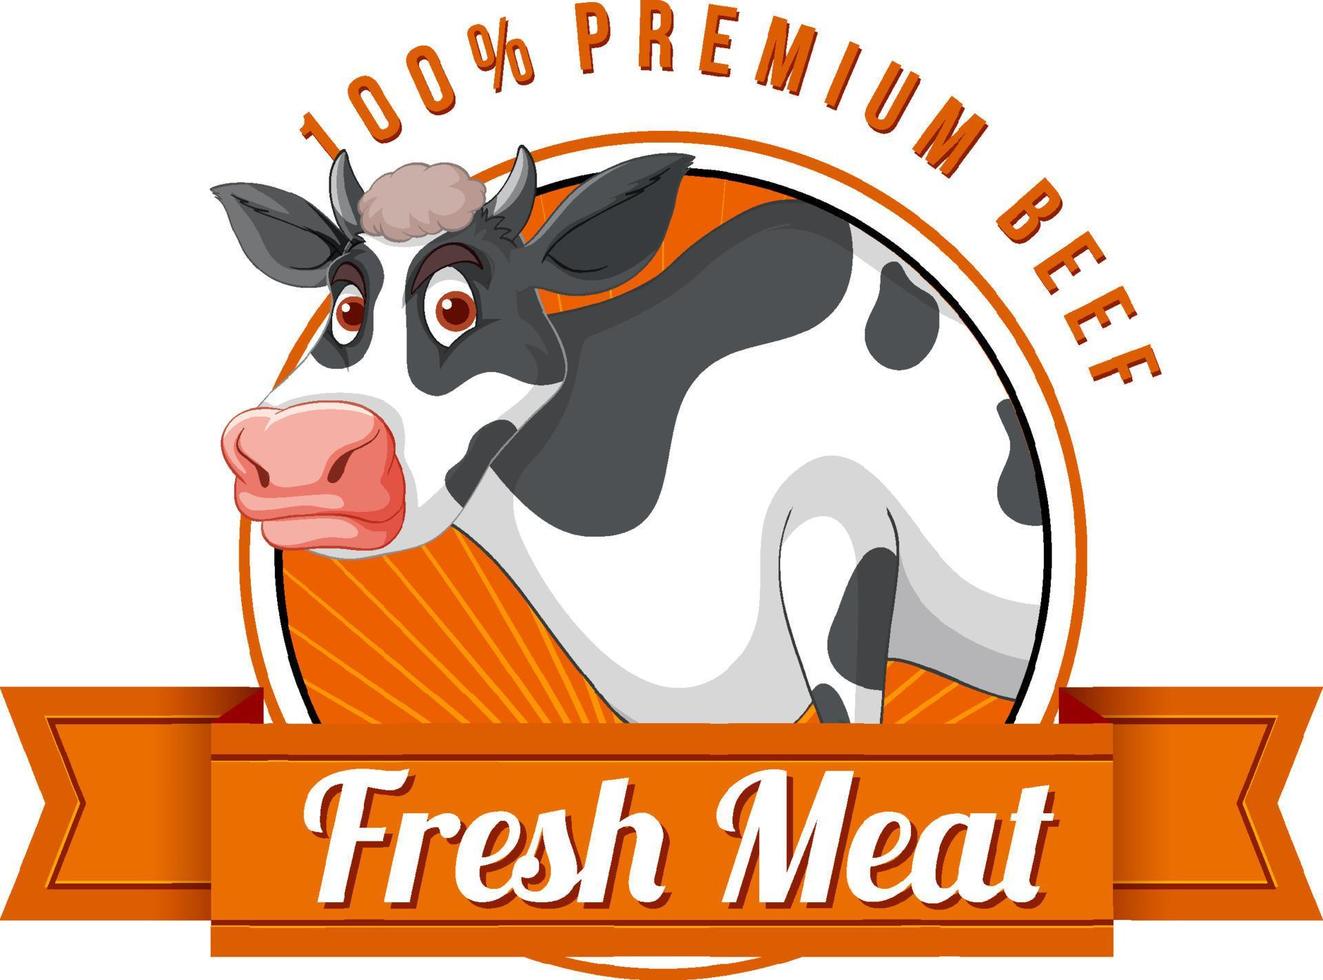 A cow with a Fresh meat label vector